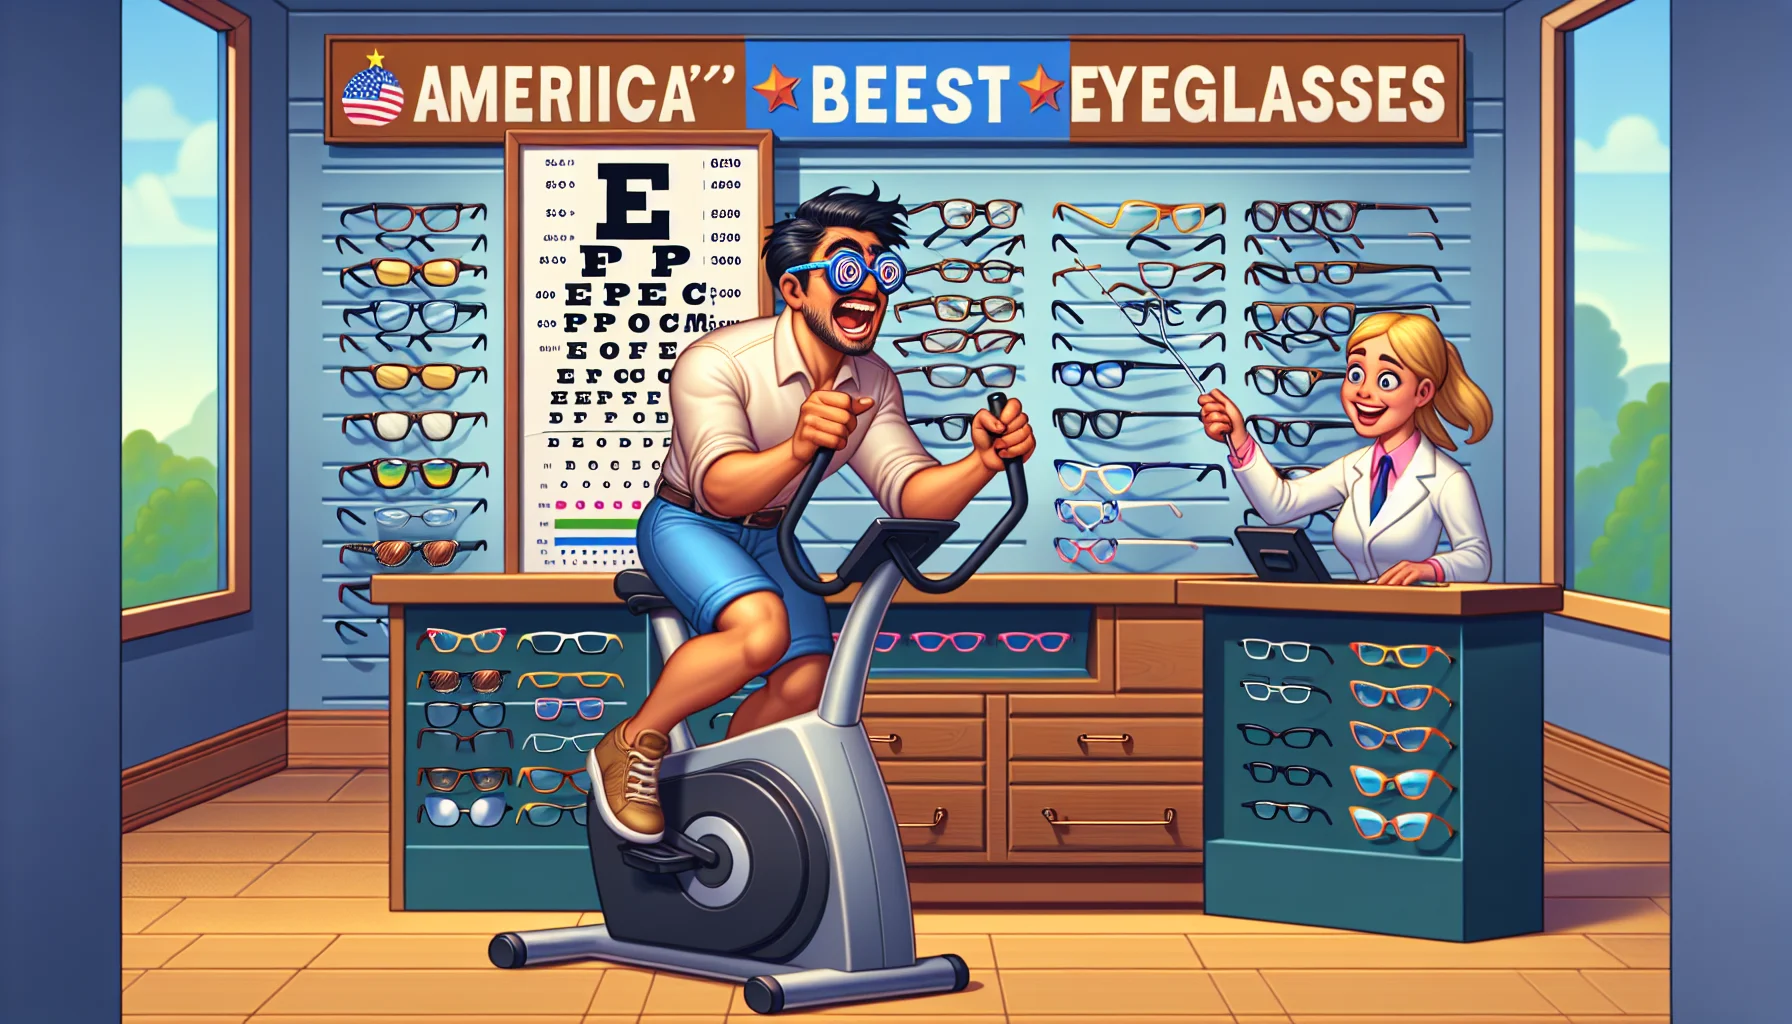 Generate an image depicting a humorous scene that encourages physical exercise, set in an eyeglasses store in the United States. The main characters include an energetic, confused Hispanic male customer trying to juggle multiple pairs of eyeglasses while attempting to ride an exercise bike, and a helpful, smiling Caucasian female storekeeper pointing towards the lens performance chart, showing how eyeglasses perform under strenuous conditions. The frames on display are diverse in style and design, reflecting a broad range of tastes. The store’s name, 'America's Best Eyeglasses,' is embellished in large, playful letters above the counter.